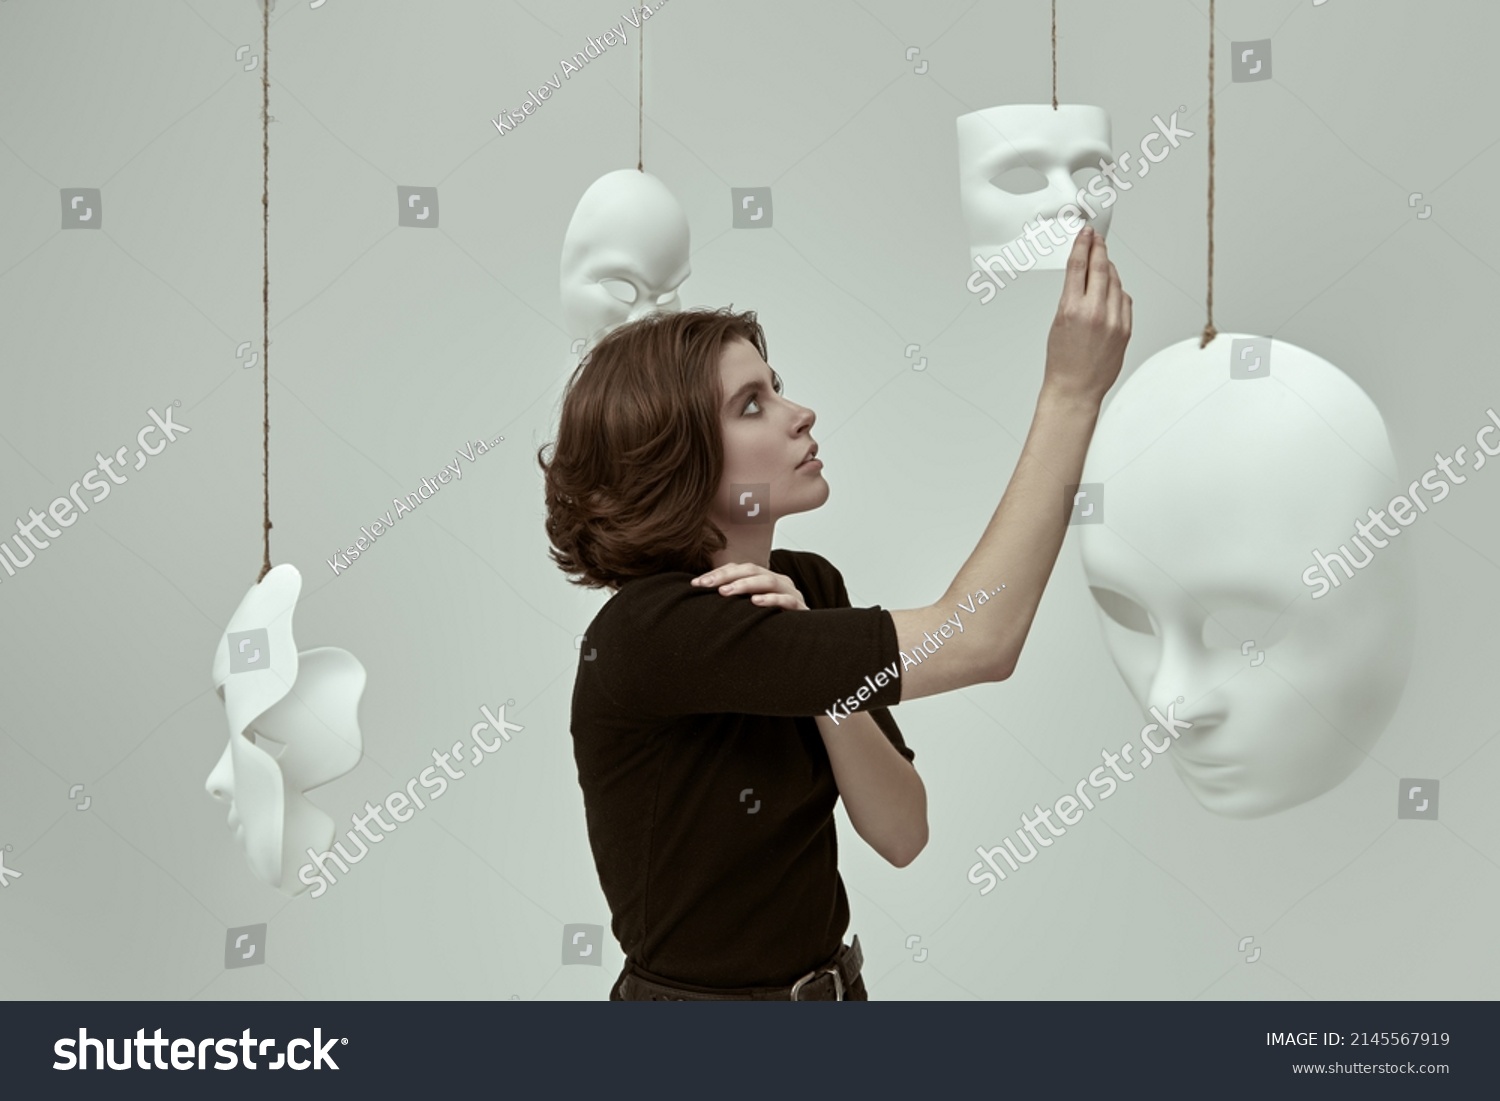 Human roles. A girl in black clothes stands in a white room among different masks deciding which one to choose. Hypocrisy. Mental disorders. #2145567919